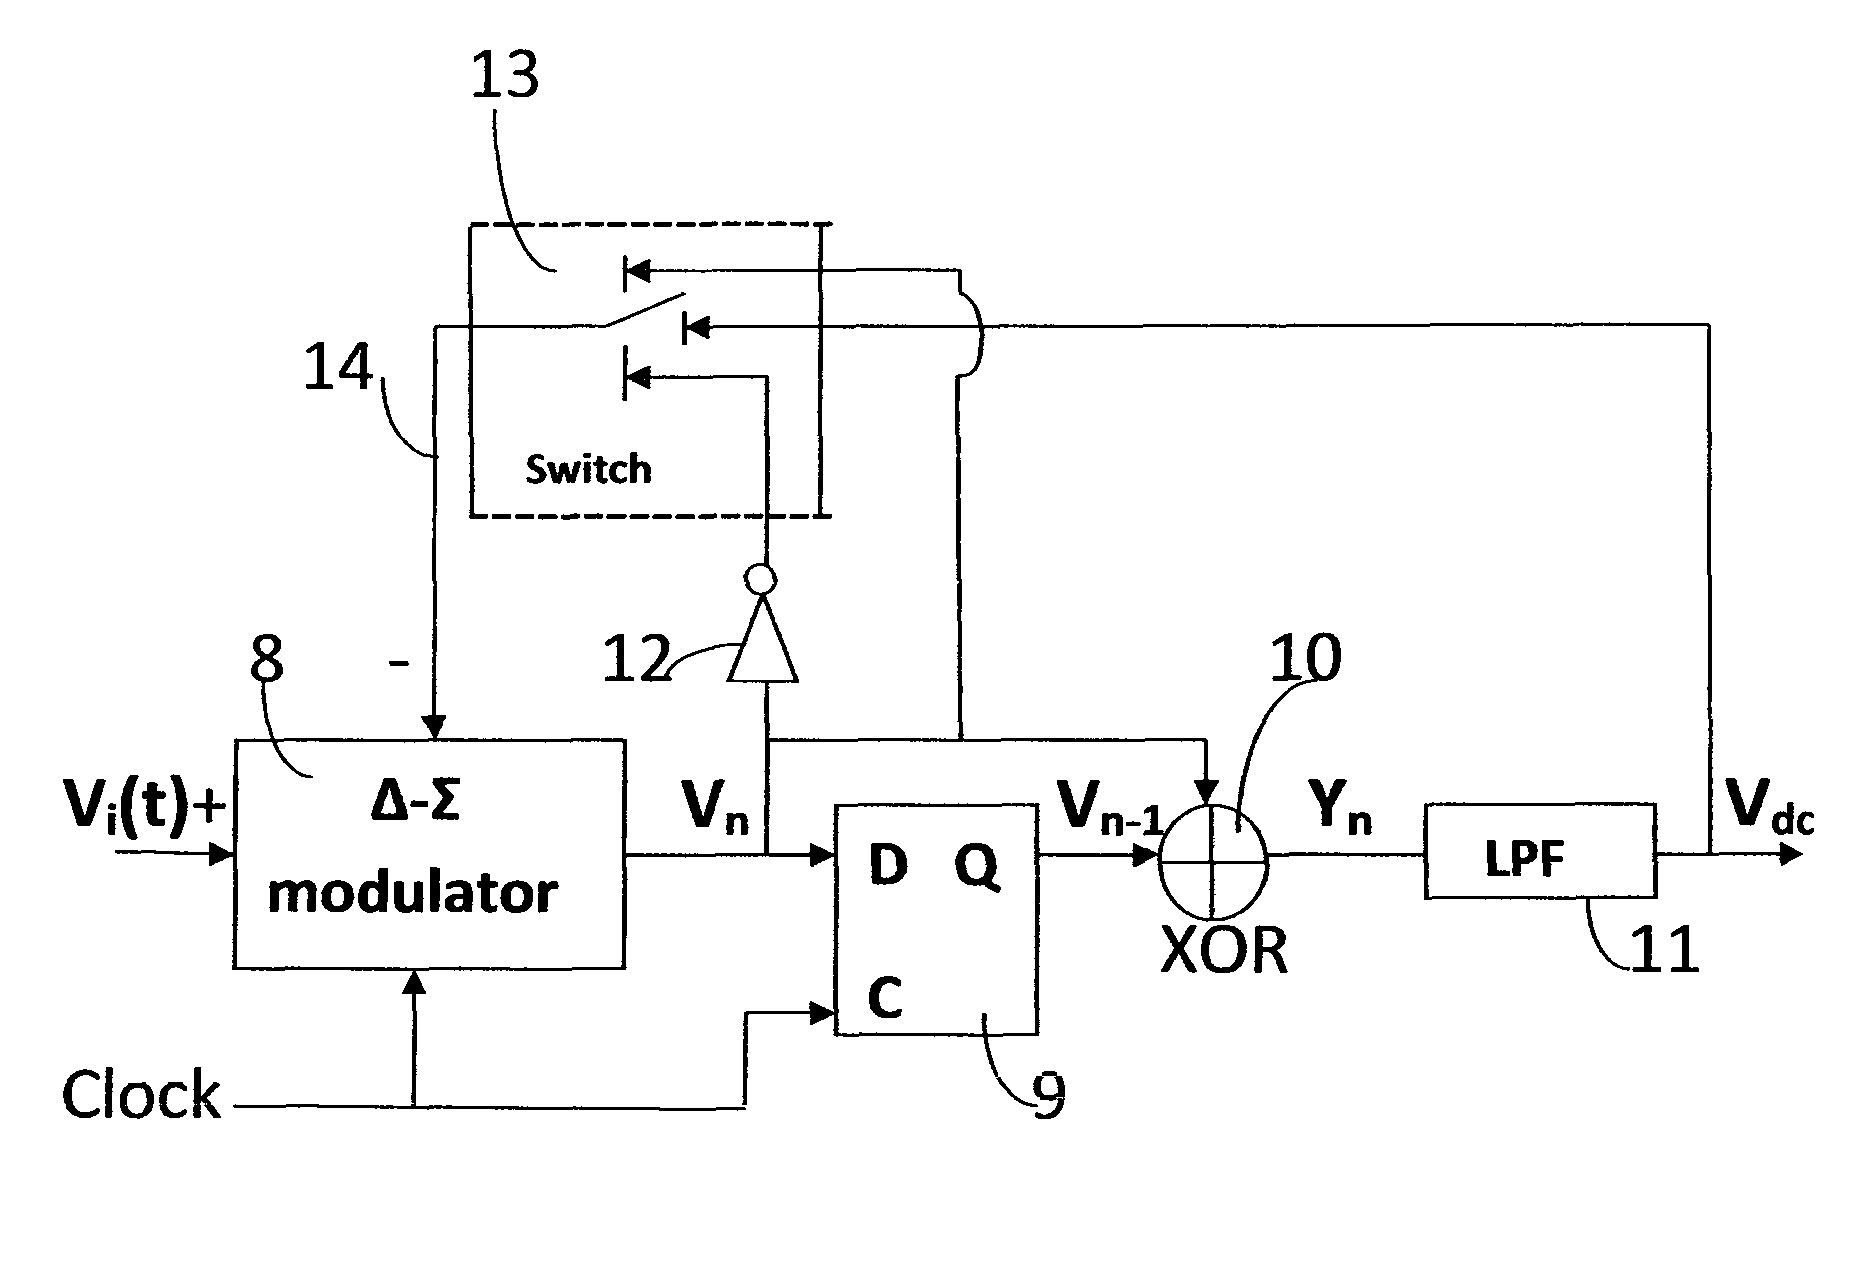 Digital architecture for delta-sigma RMS-to-DC converter